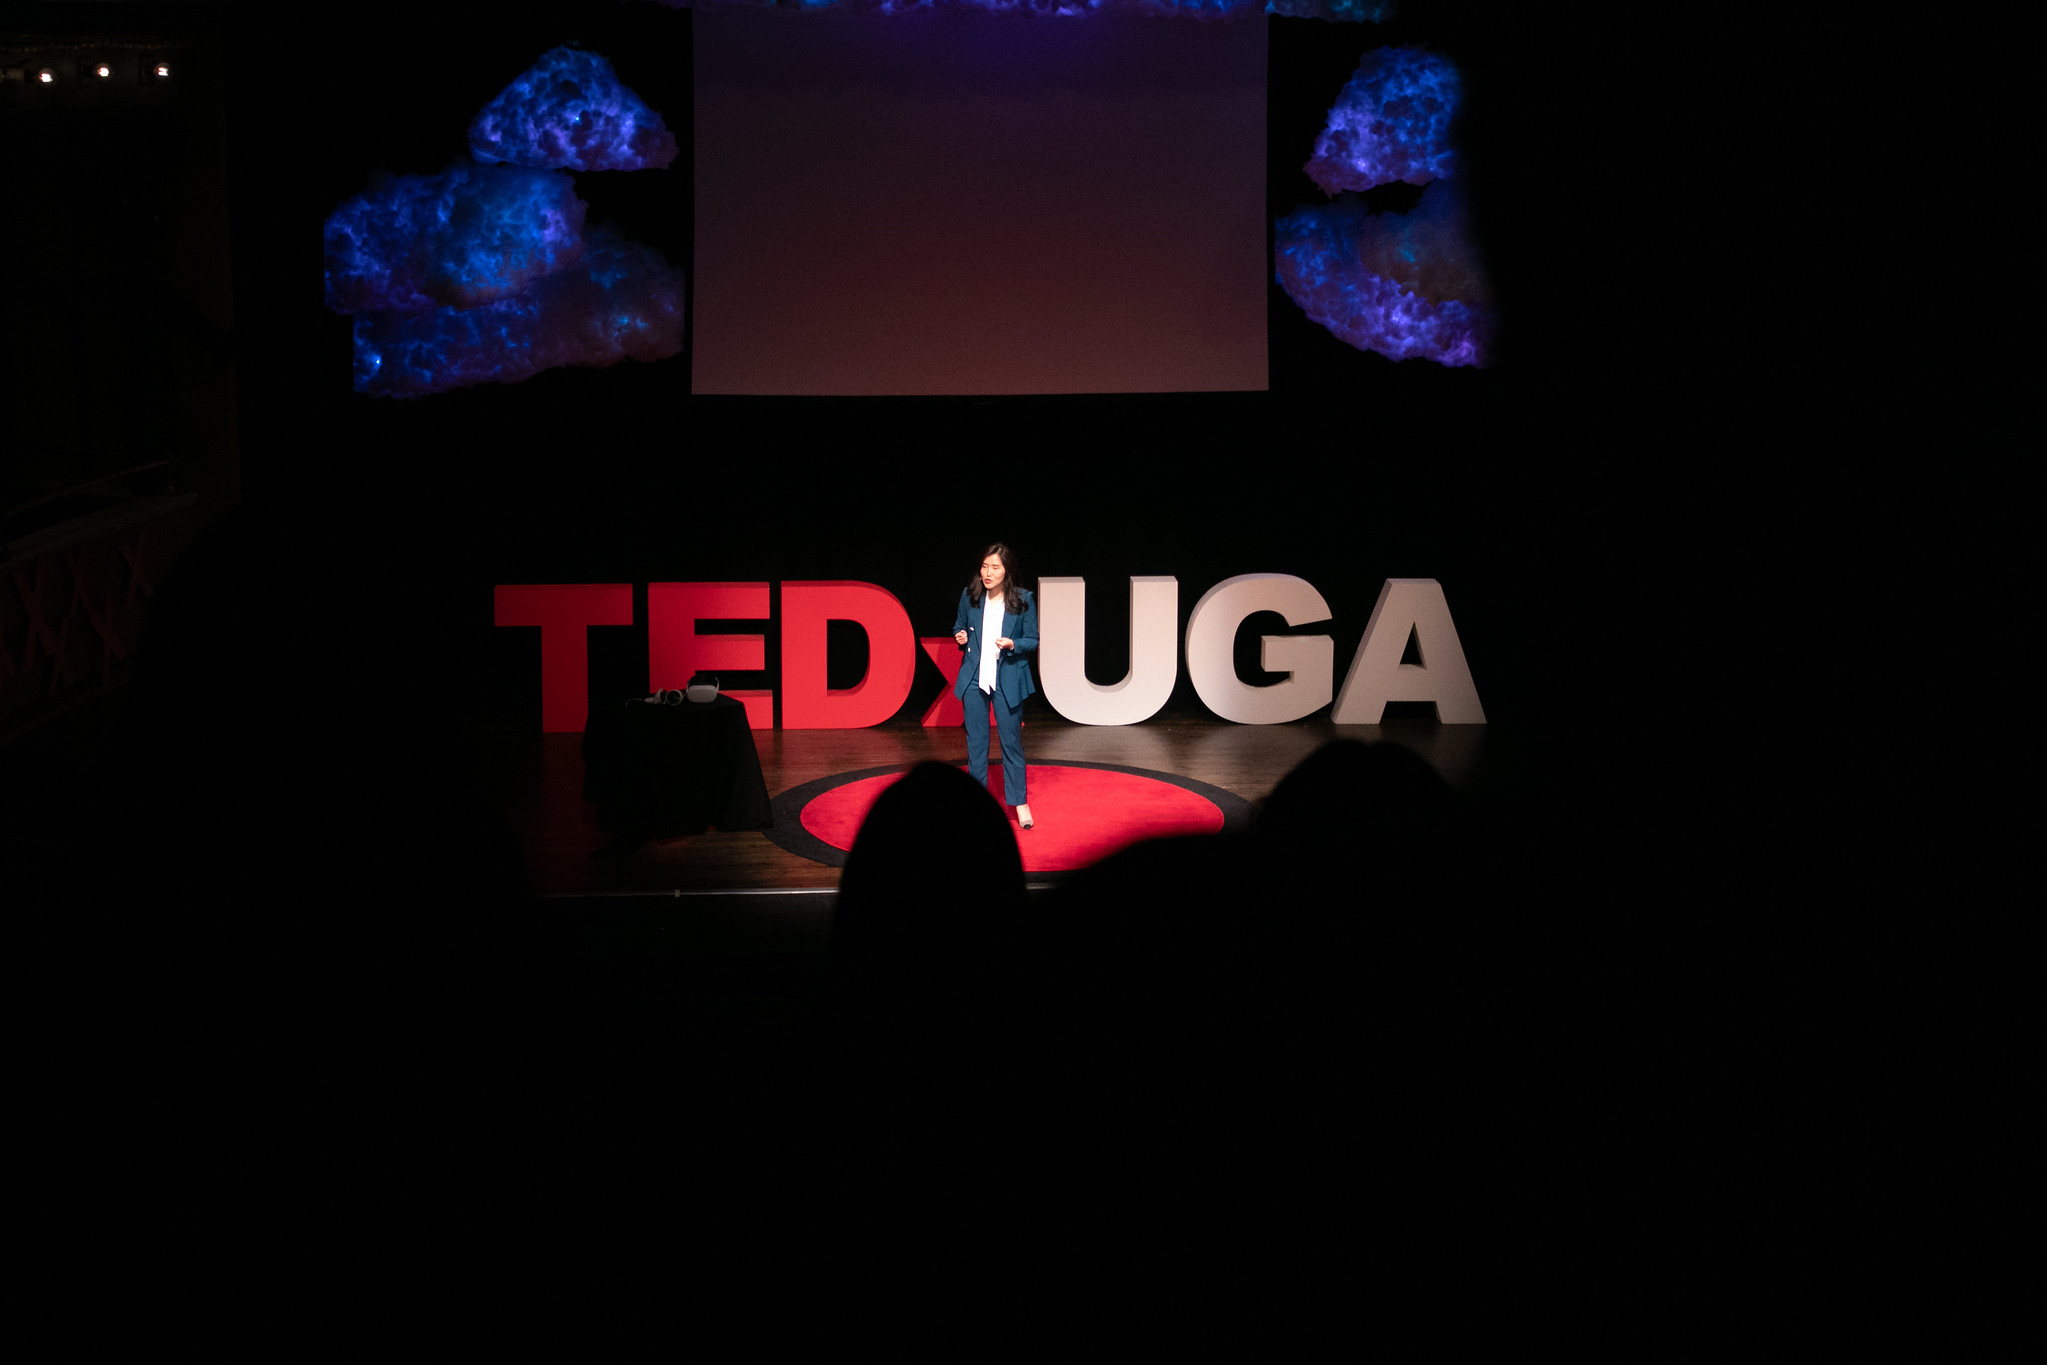 TEDxUGA presenter on stage with crowd in foreground